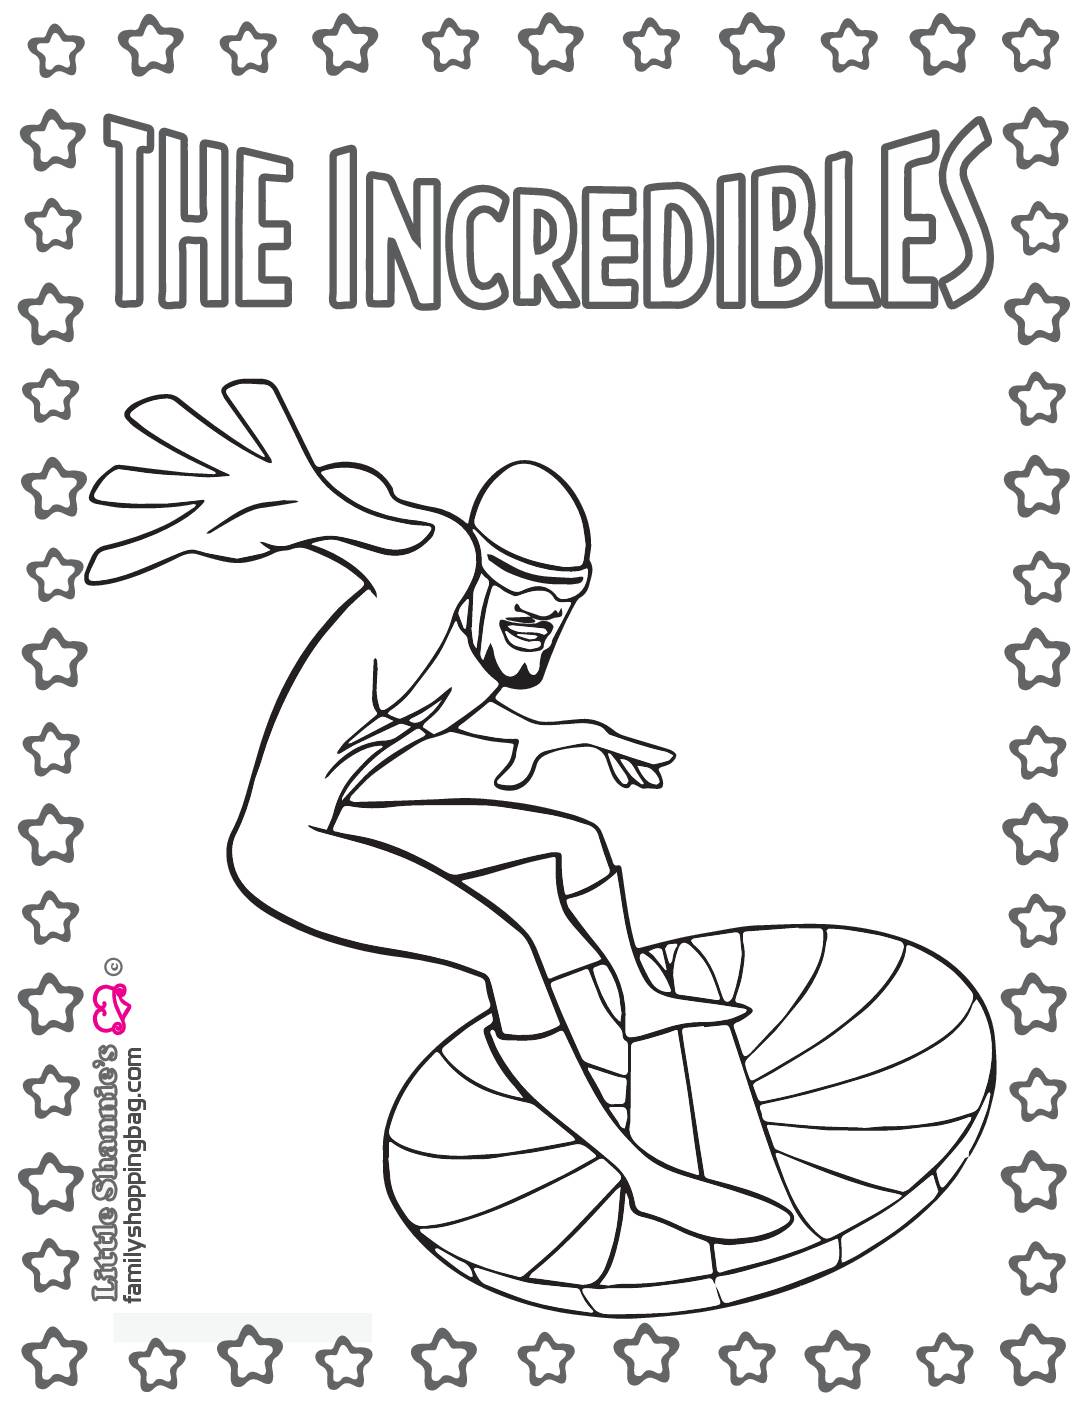 Coloring Page 9 Incredibles